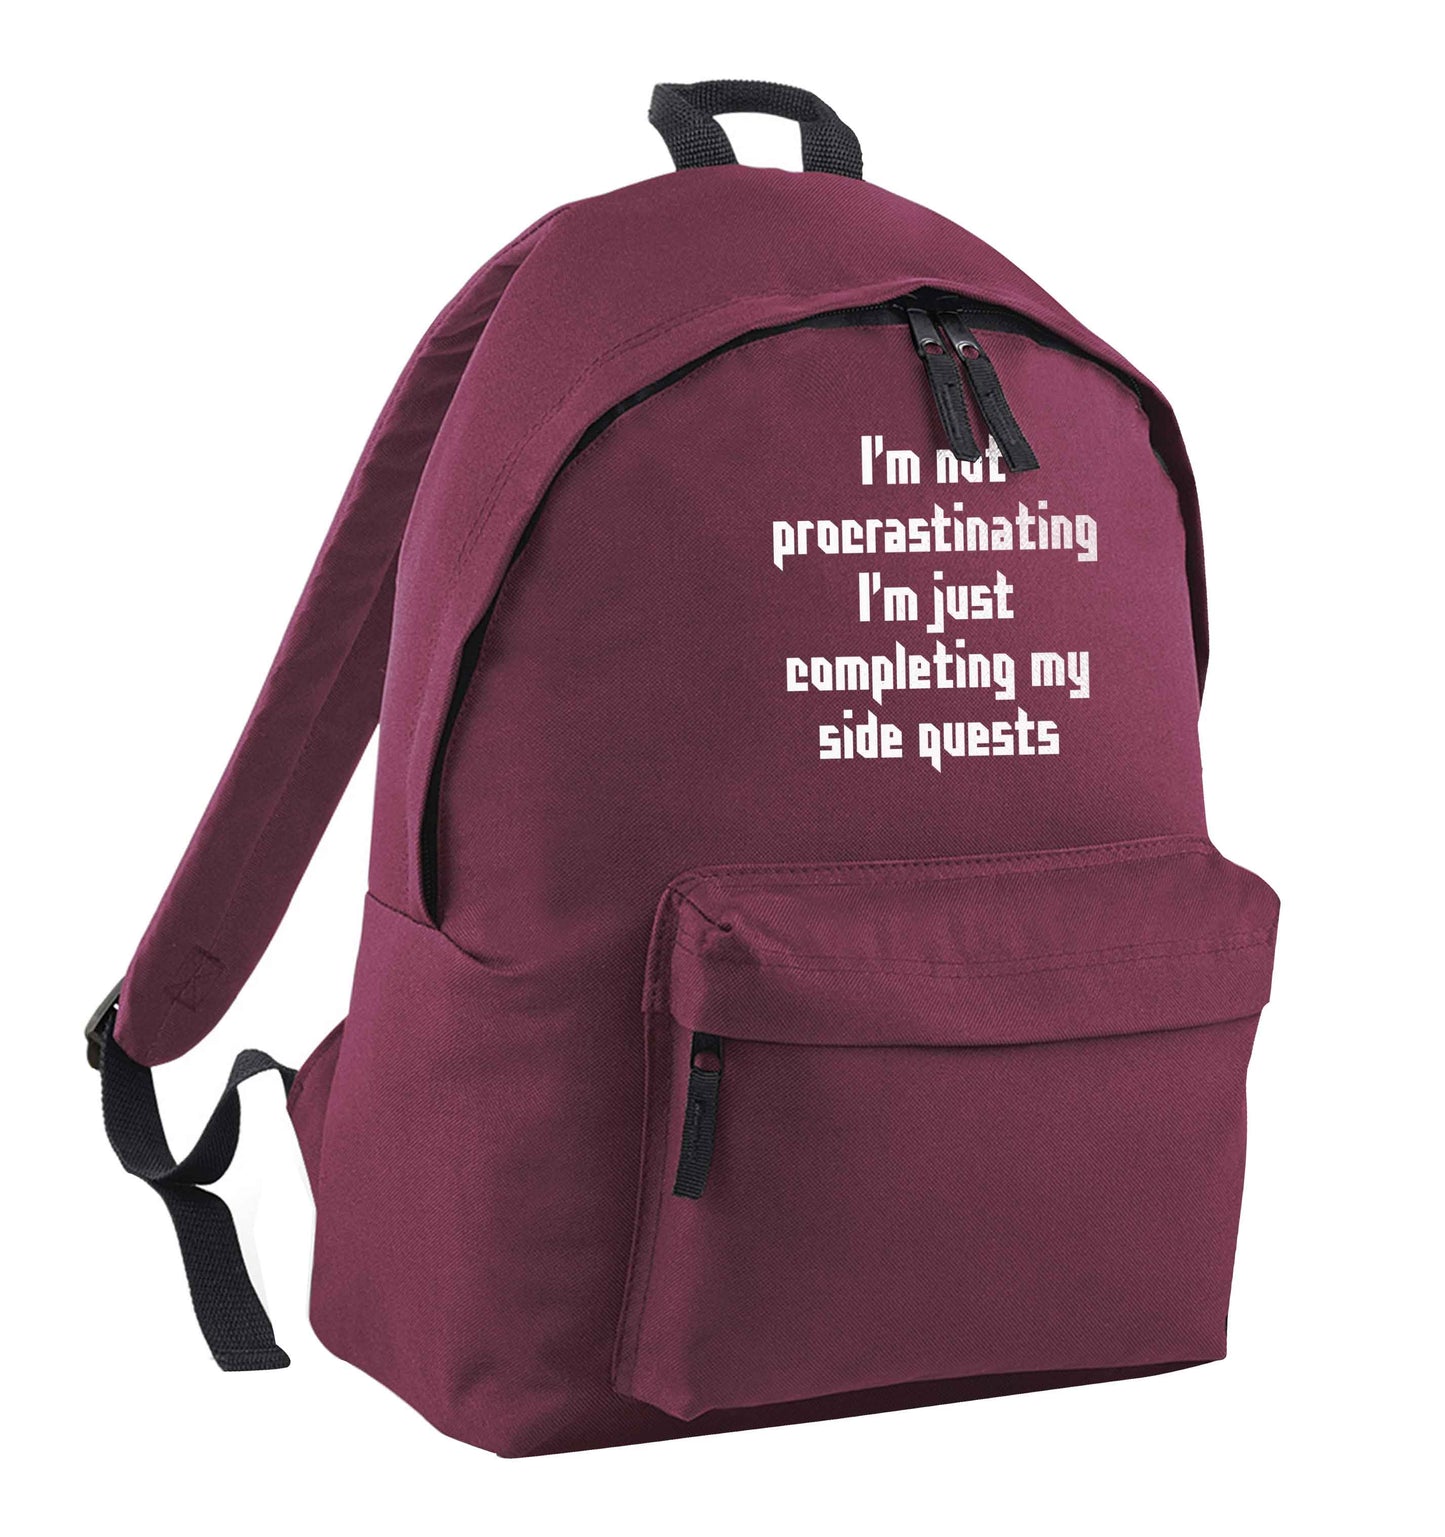 I'm not procrastinating I'm just completing my side quests maroon adults backpack